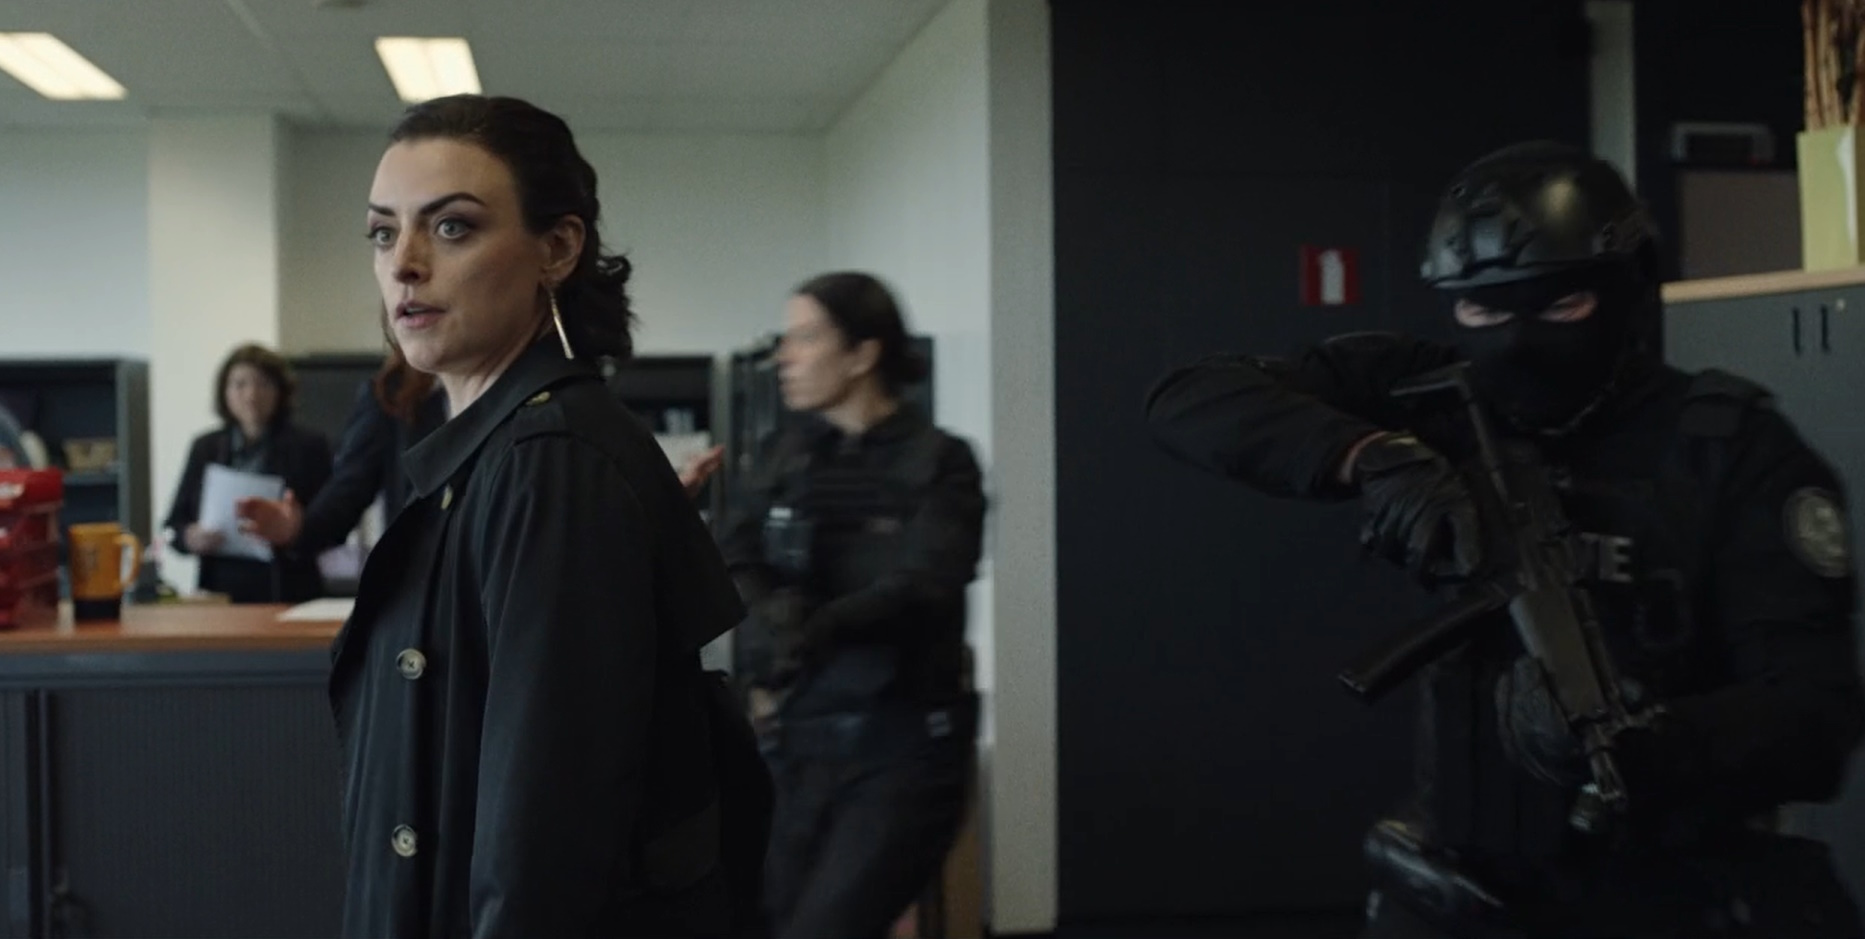 A DSU operative breaches an office with his MP5 in S02E04.